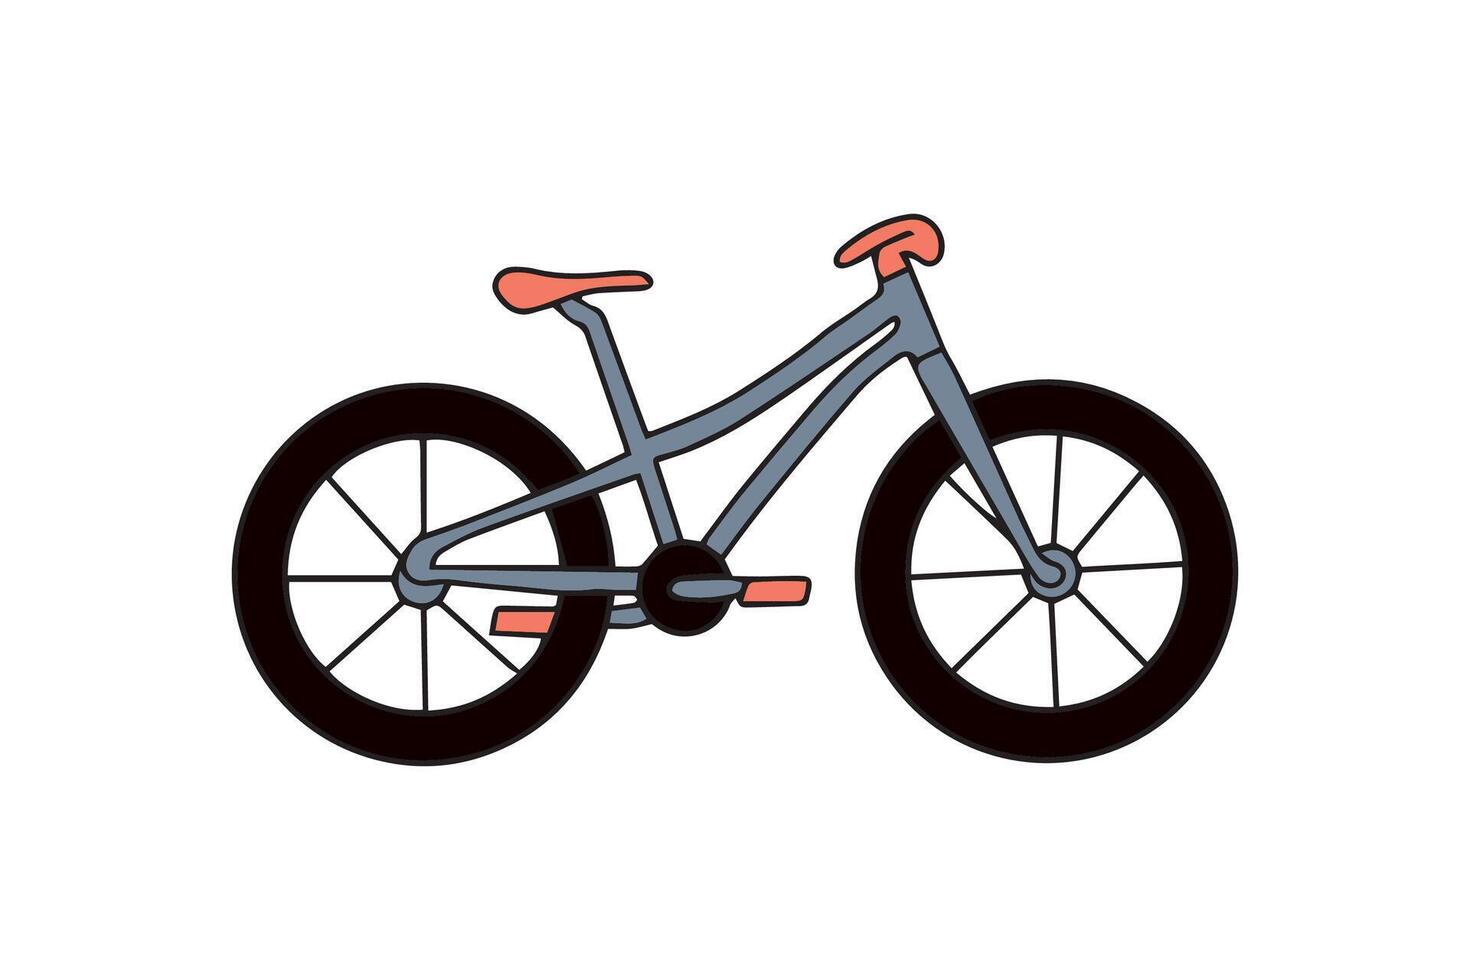 Bicycle icon in doodle style on a white background. Place location marker. illustration. vector